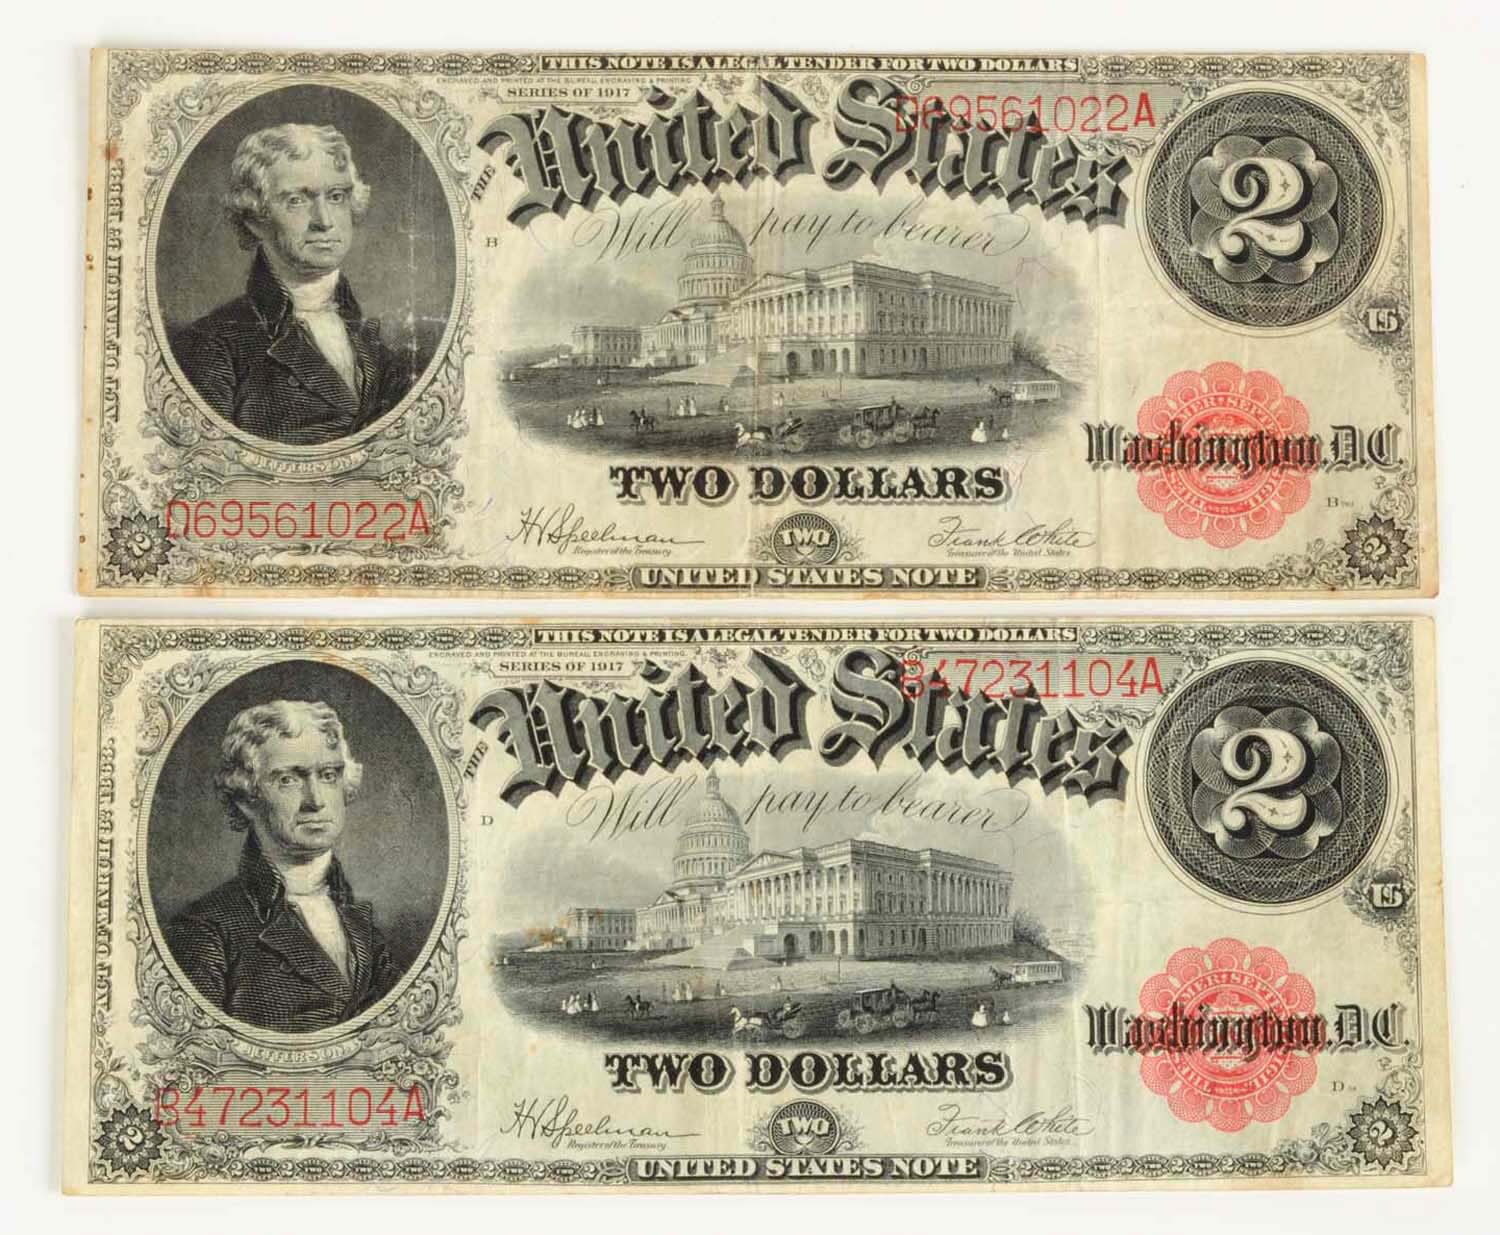 Pair of 1917 Jefferson $2 Notes, Estimated at $200-300.